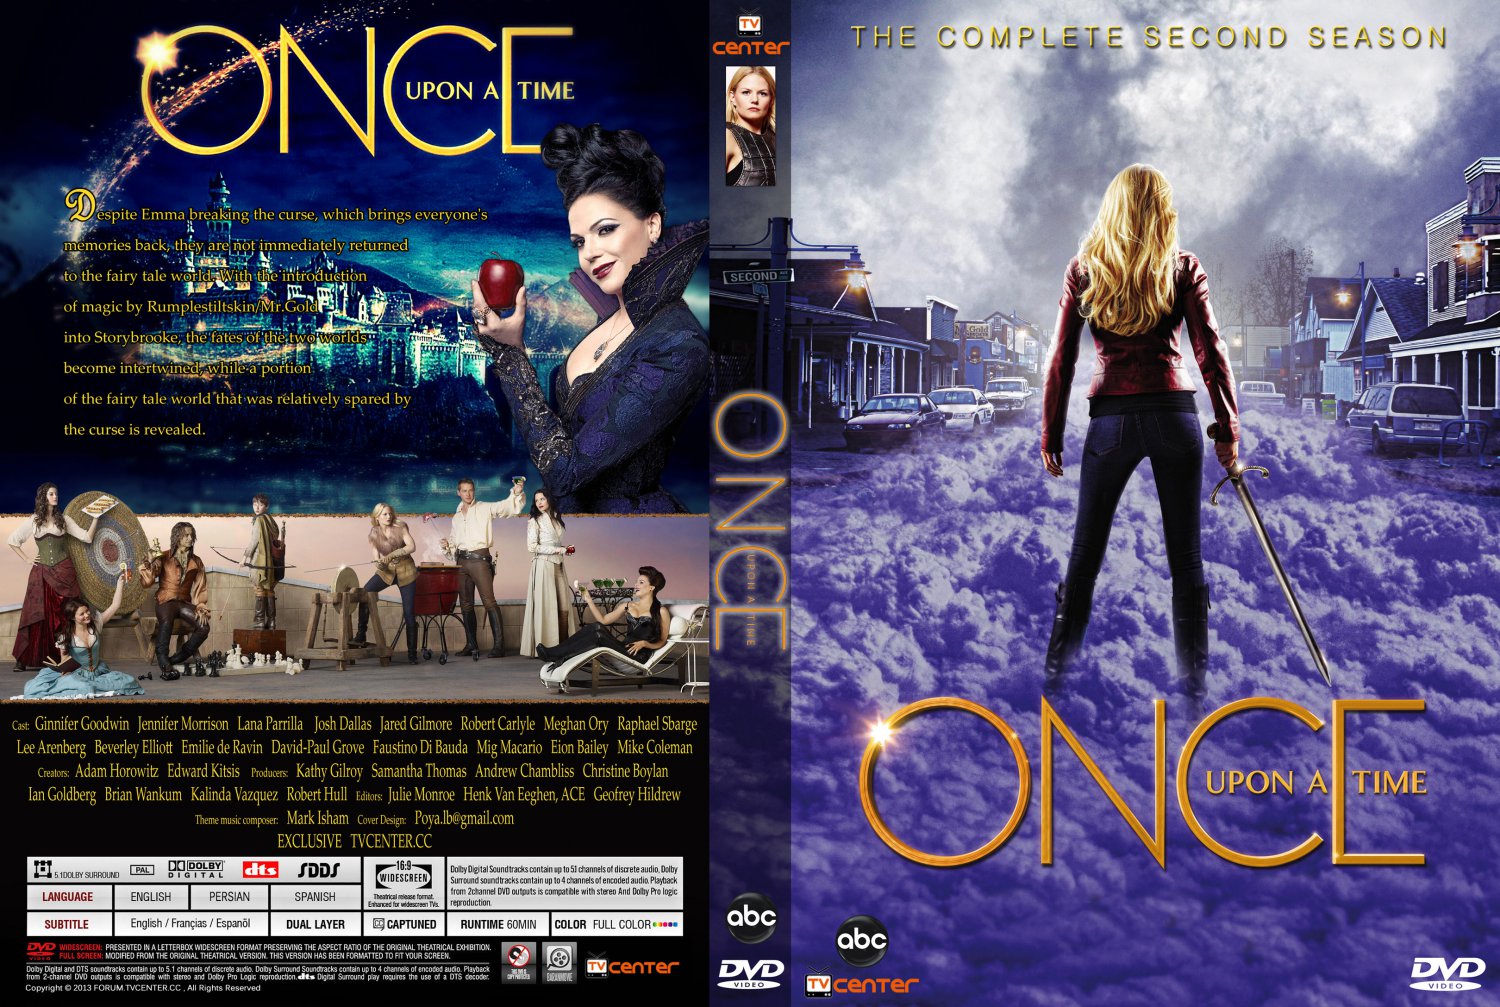 Once Upon A Time - Season 4 Blu-ray - Featuring Elsa